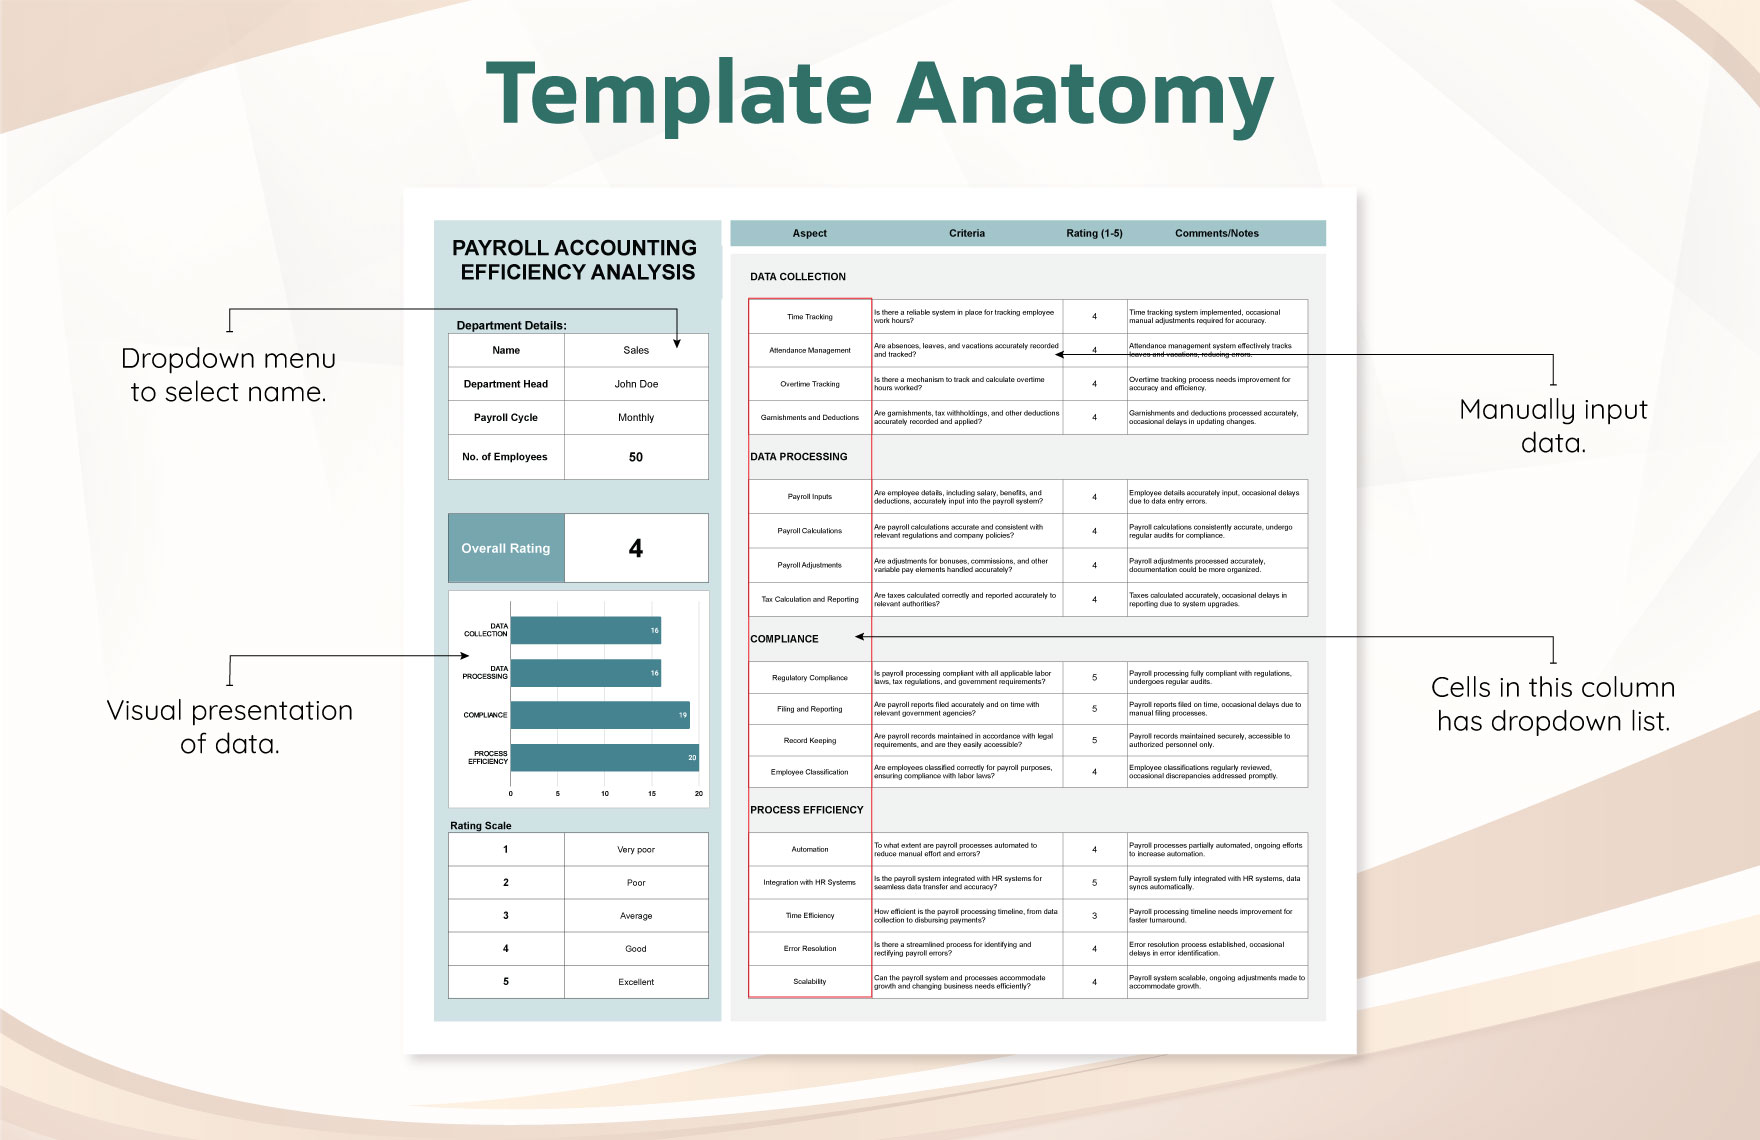 Payroll Accounting Efficiency Analysis Template